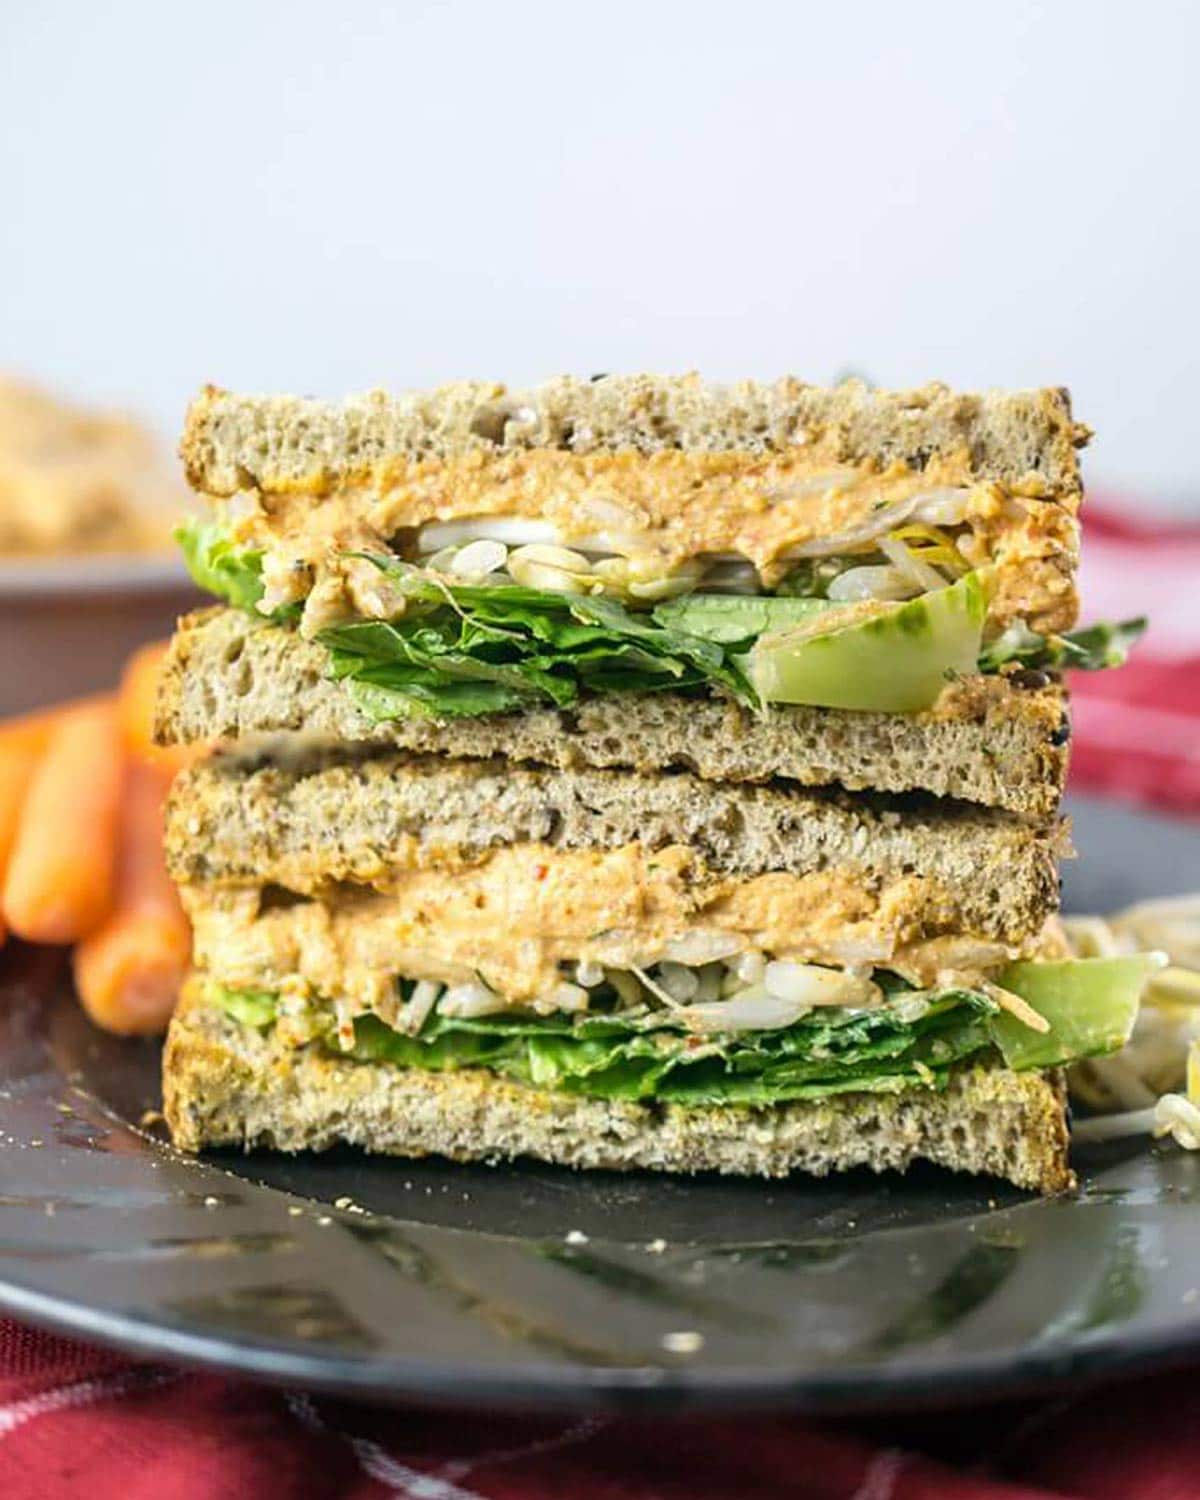 A vegan egg salad sandwich stacked on a plate.